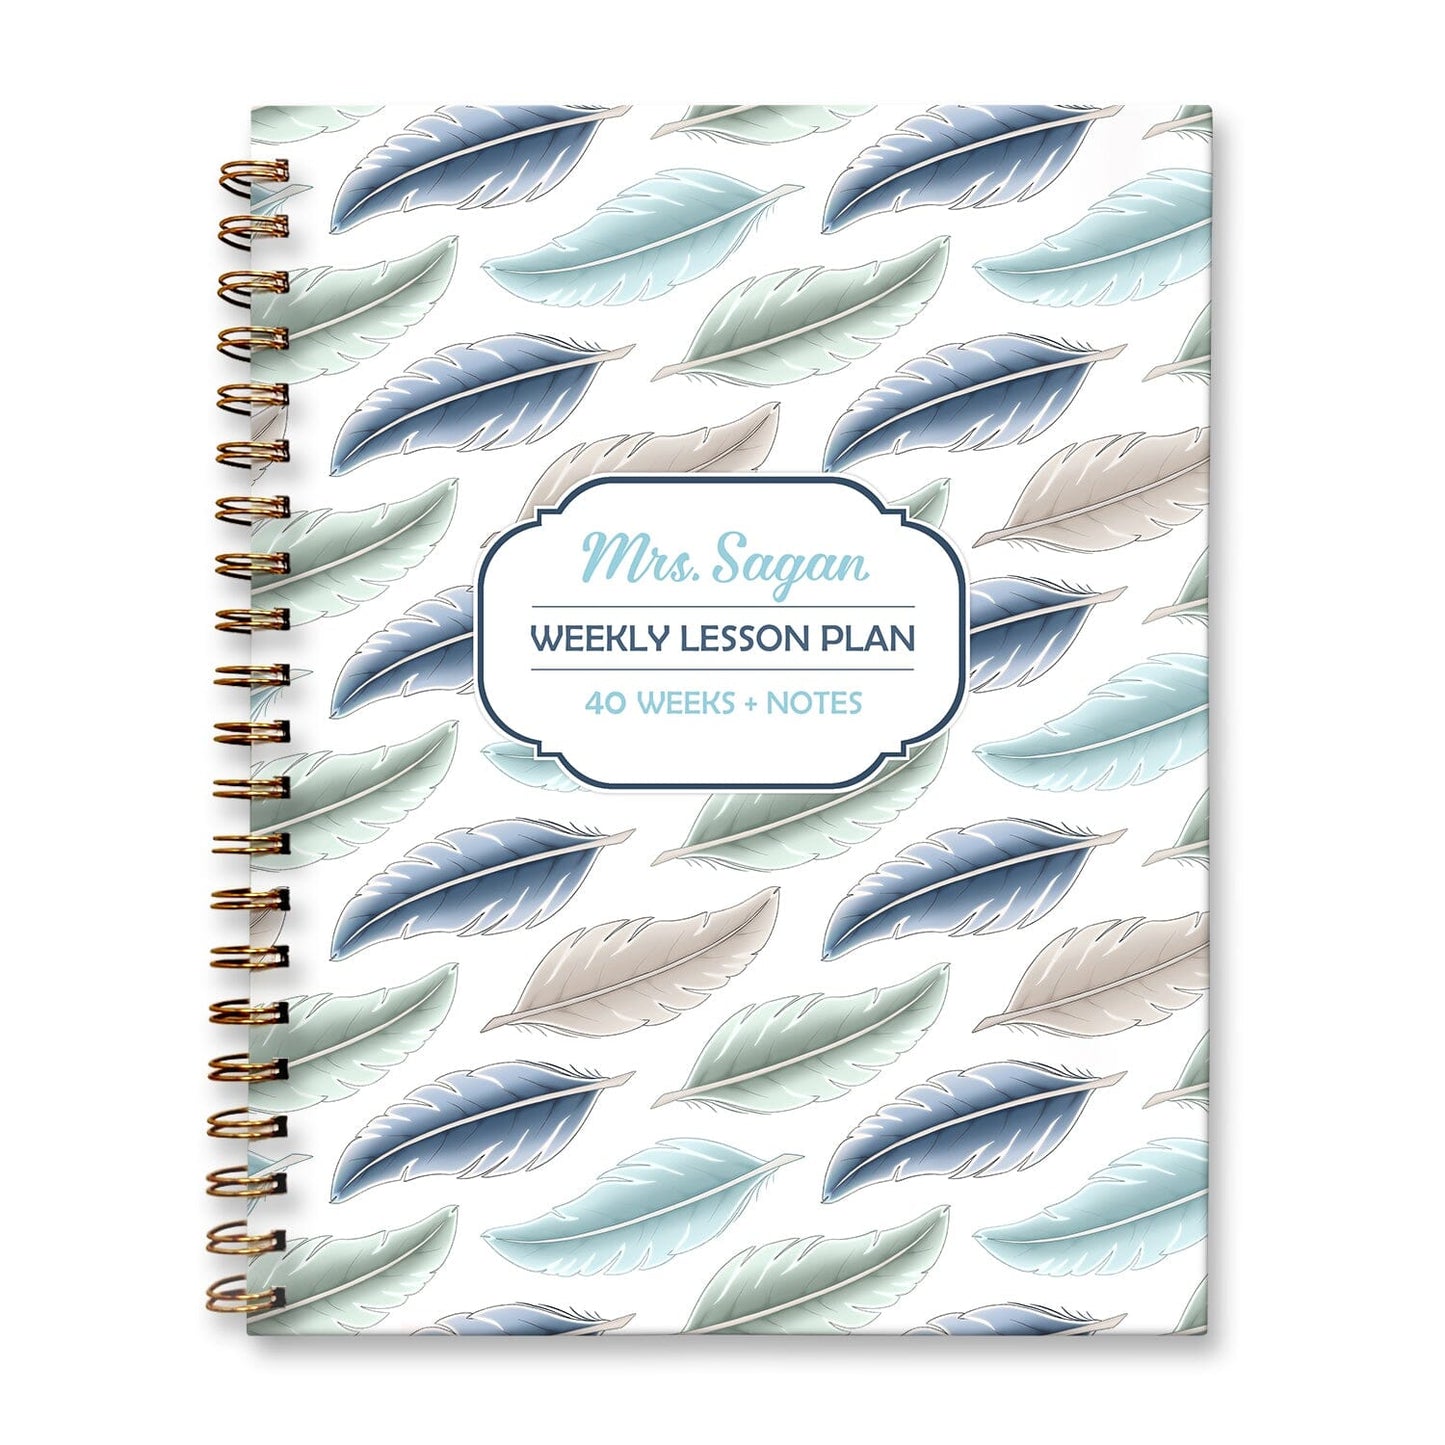 Personalized Coastal Feathers Weekly Lesson Plan Book at Artistically Invited. Hardcover planner book for teachers or homeschooling.